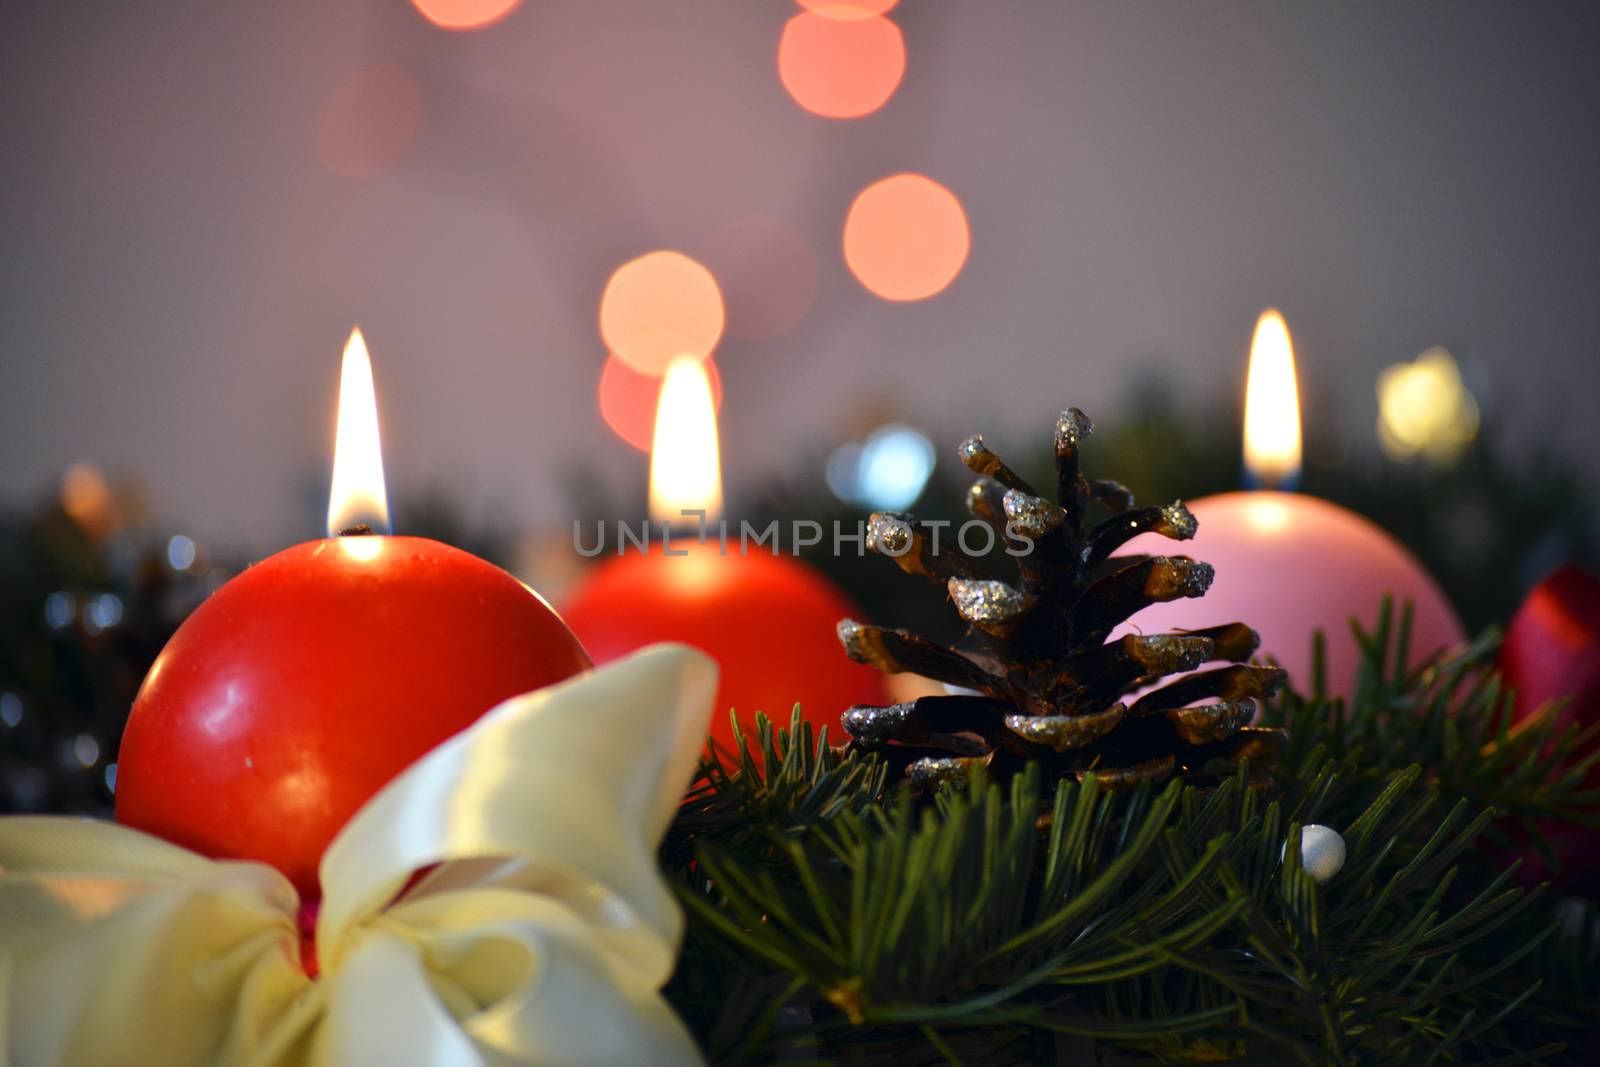 Three Advent Candles against Christmas tree and decorated on the table, in the night time